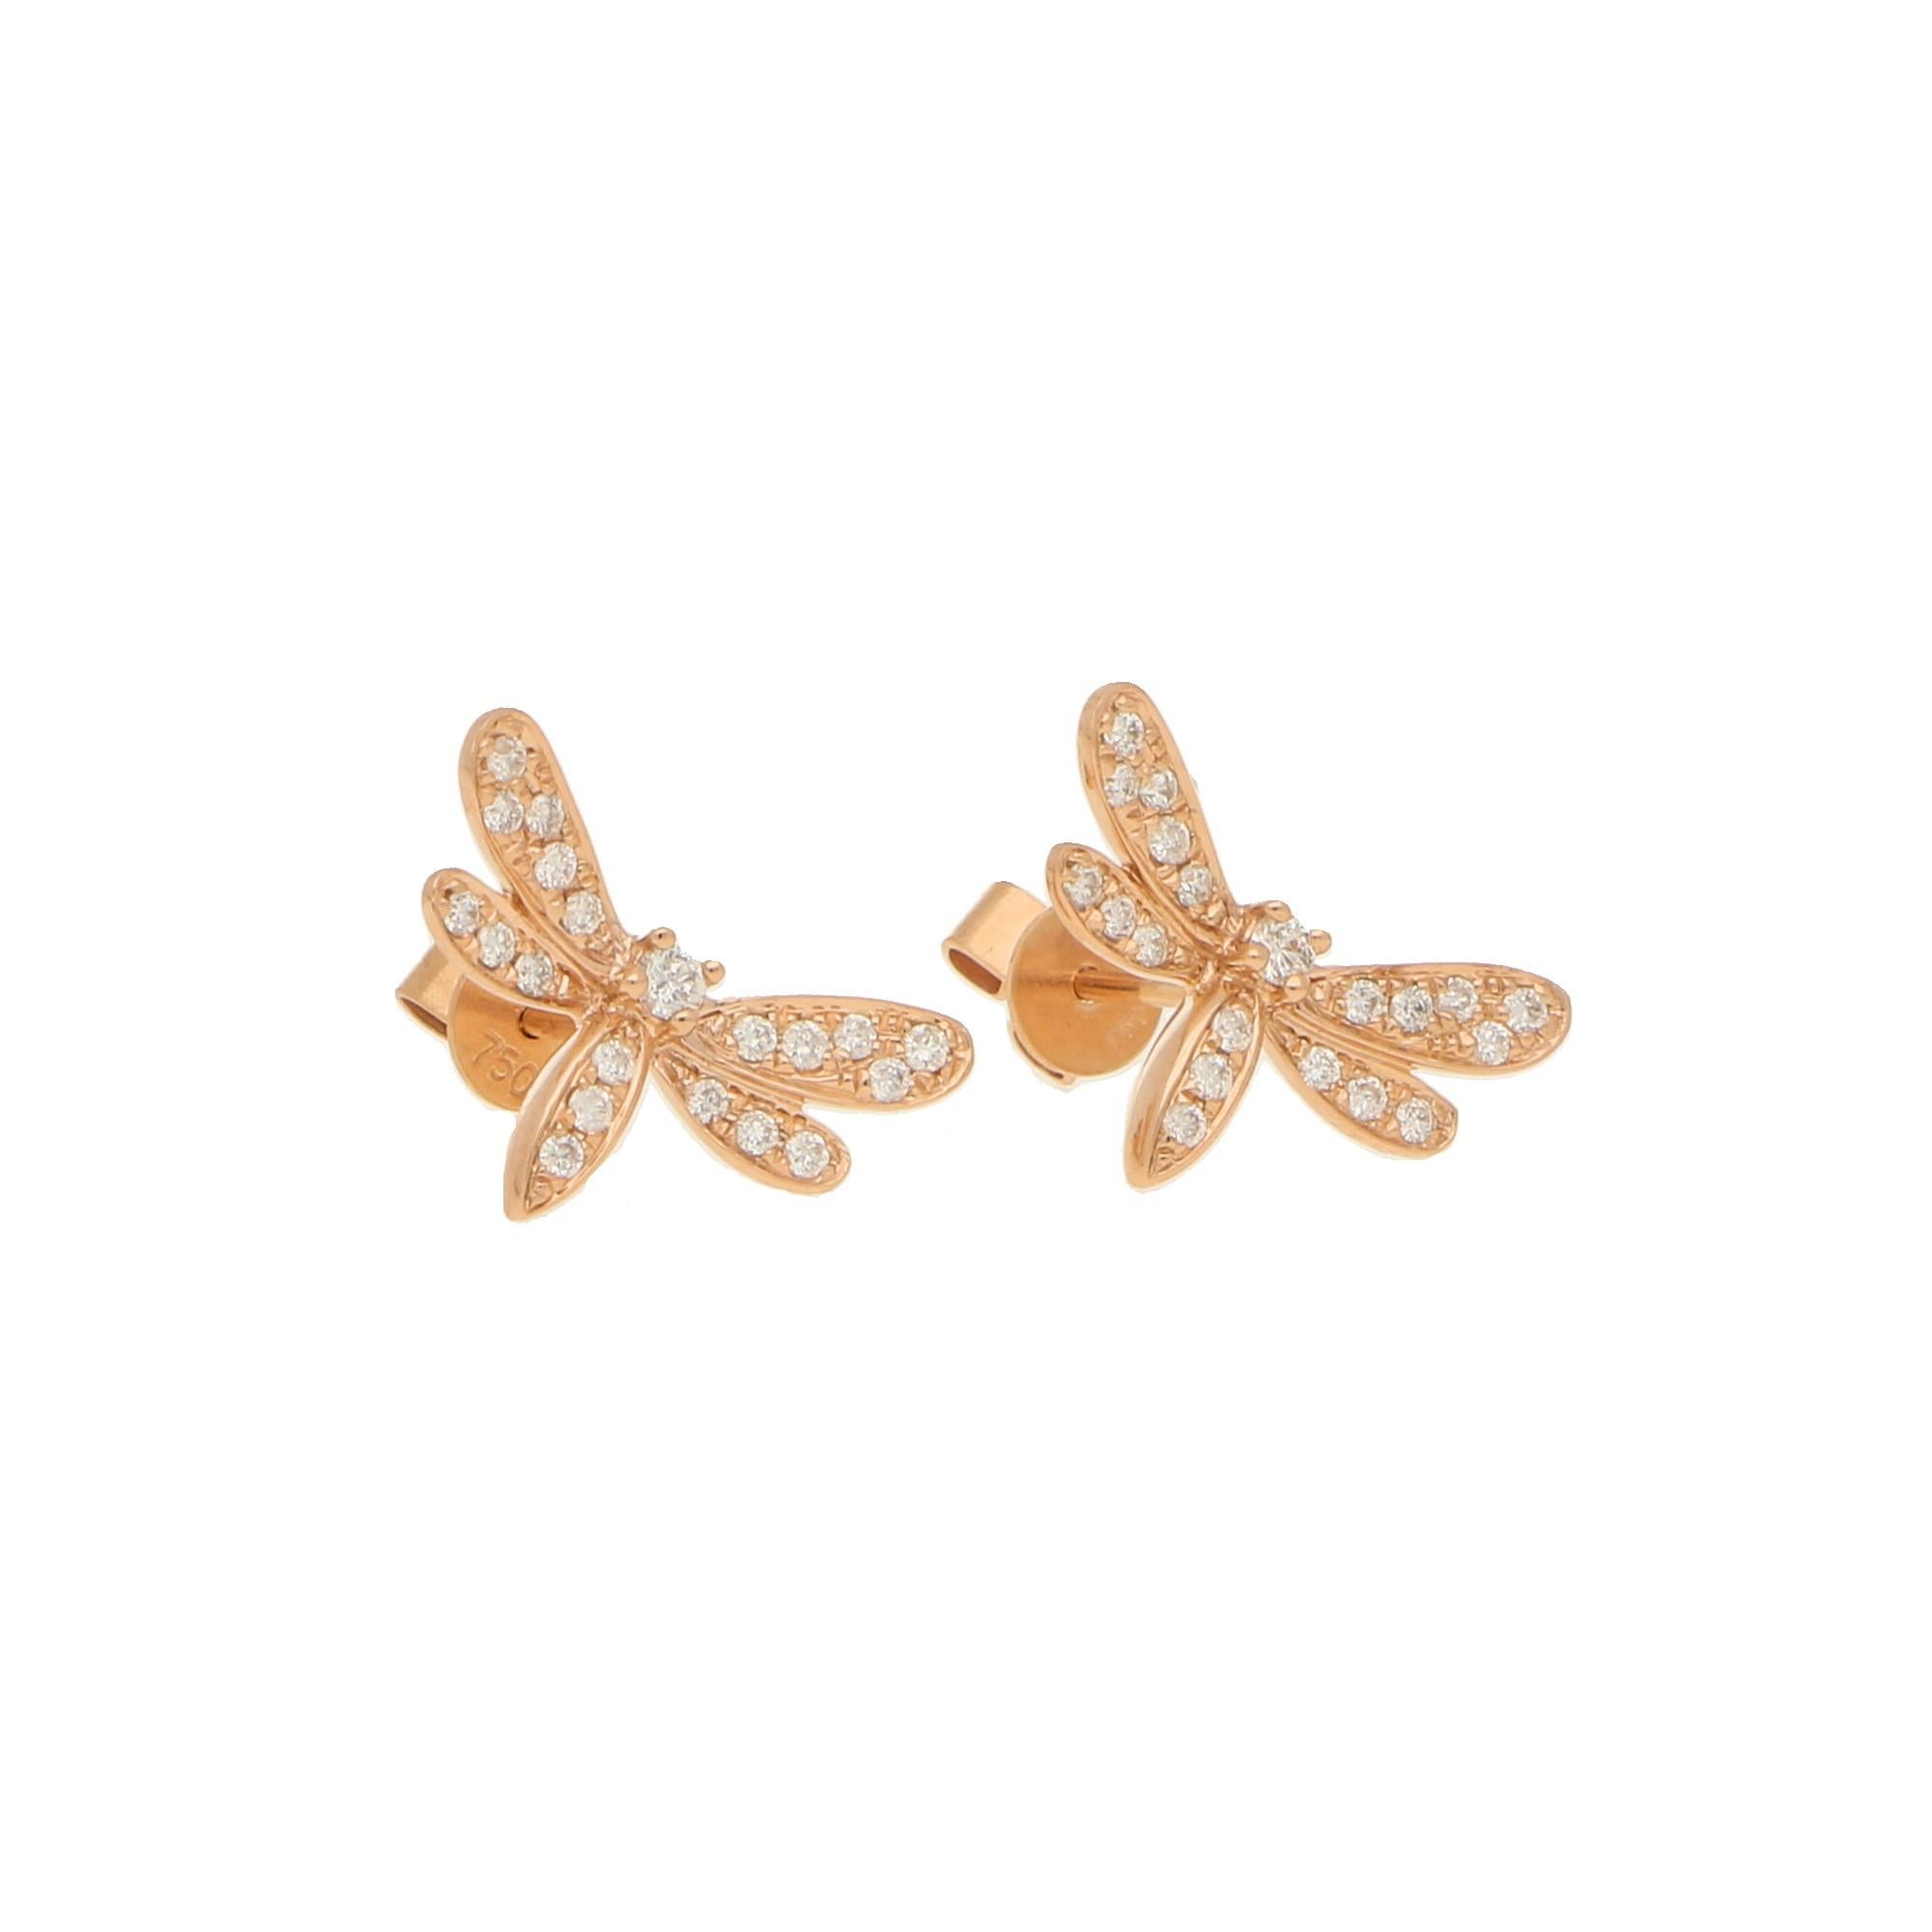 A pretty pair of 18ct rose gold and diamond dragonfly earrings. 
All the diamonds are grain set with 40 round brilliant cut diamonds on the wings, head and body. Secured with a post and scroll fittings. 
Gross weight 2.01 grams. Total diamond weight